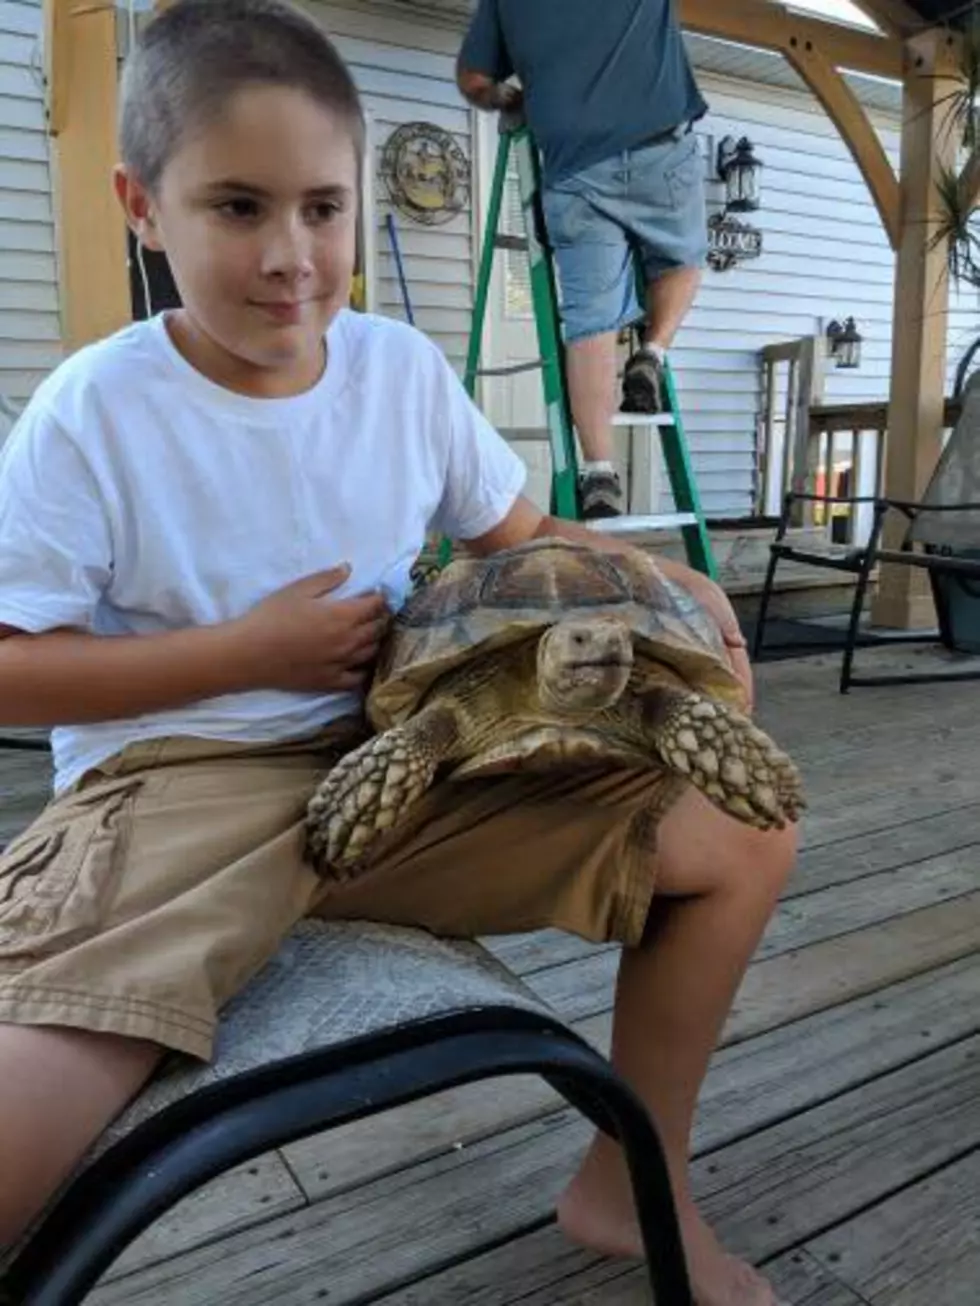 Parchment Family Reunited With Lost Tortoise